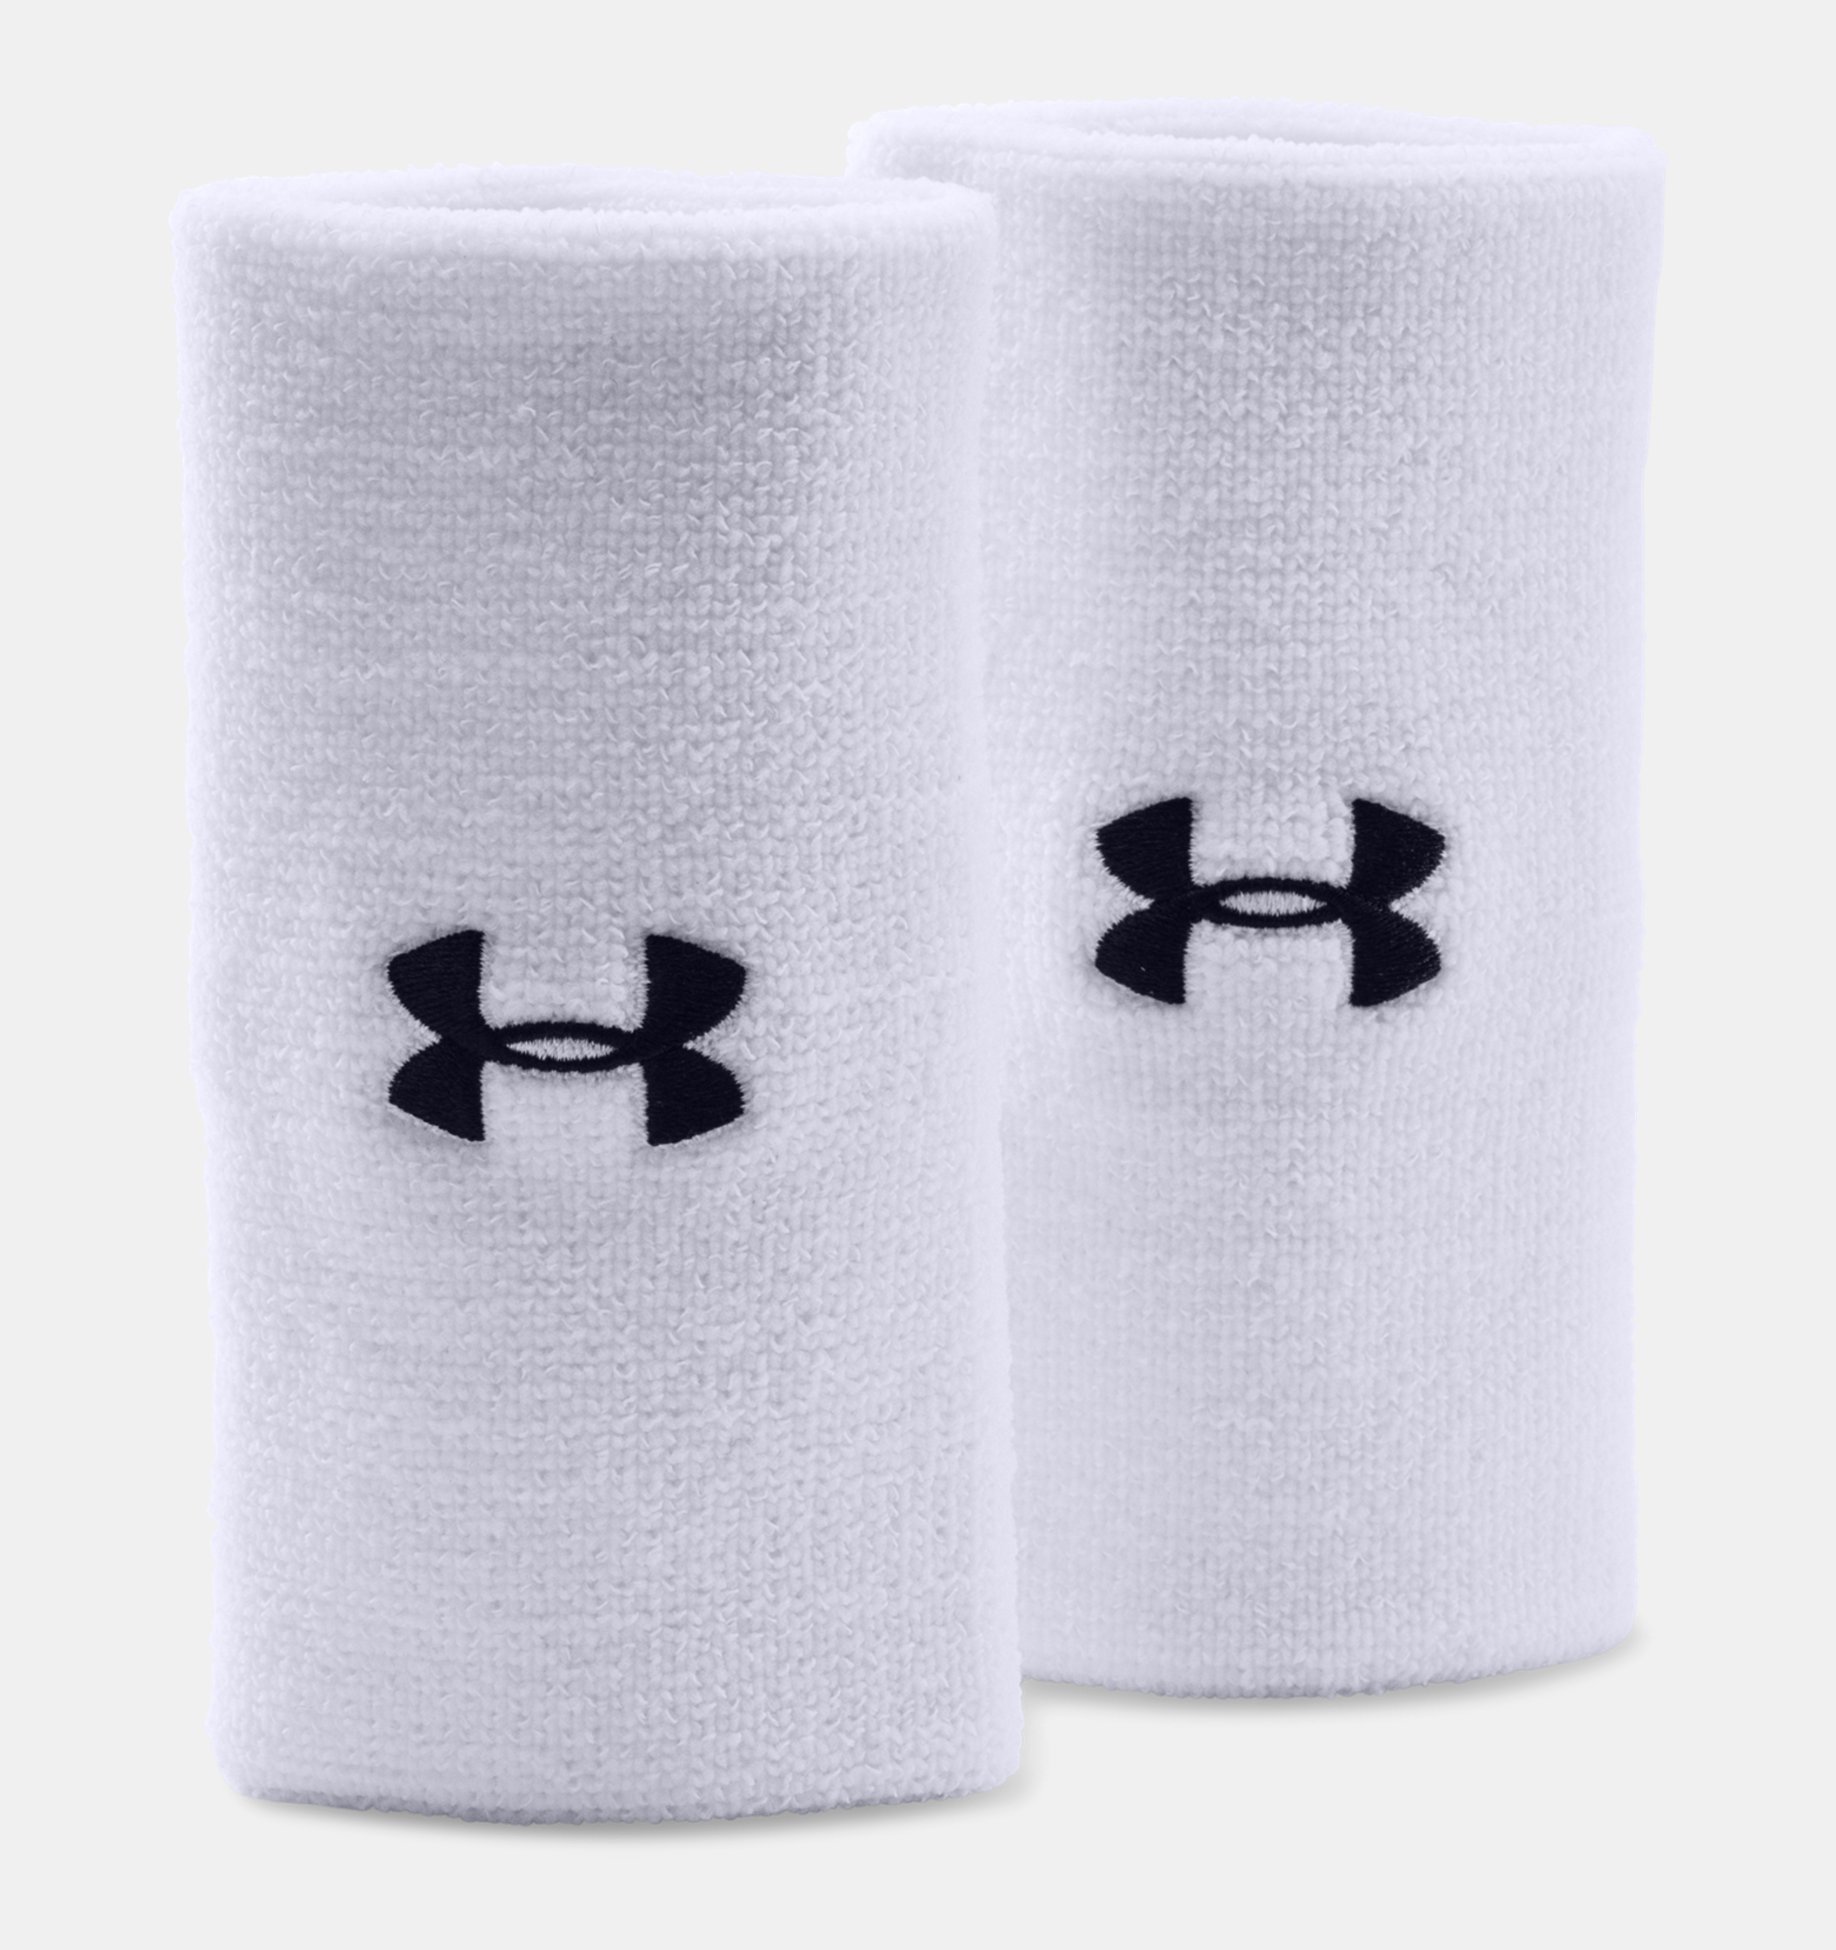 Under Armour 6 Performance Wristband White 100 One Size for sale online 